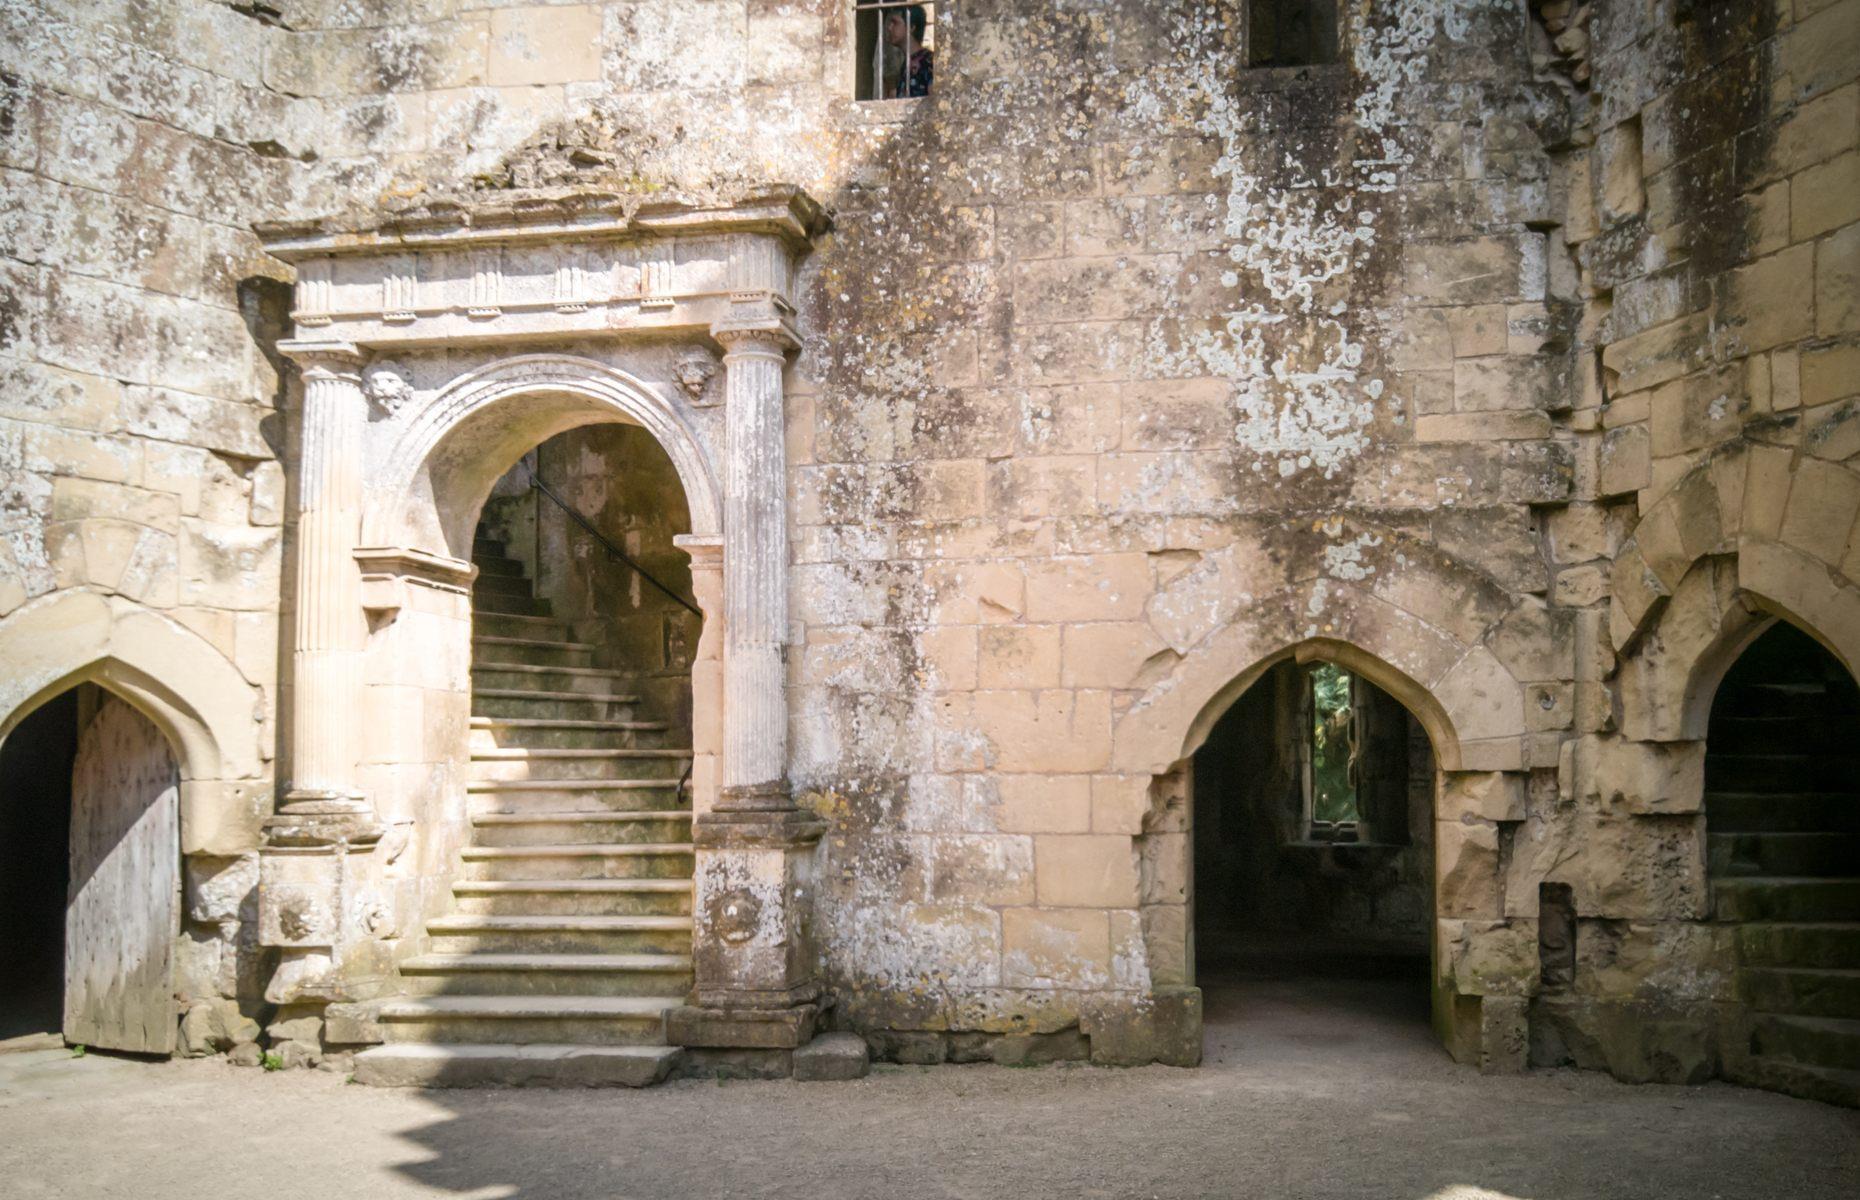 Slide 15 of 29: The Arundells never rebuilt Wardour and instead constructed a new house close by. The Old Wardour Castle later became an English Heritage property and it's now open to the public to explore.